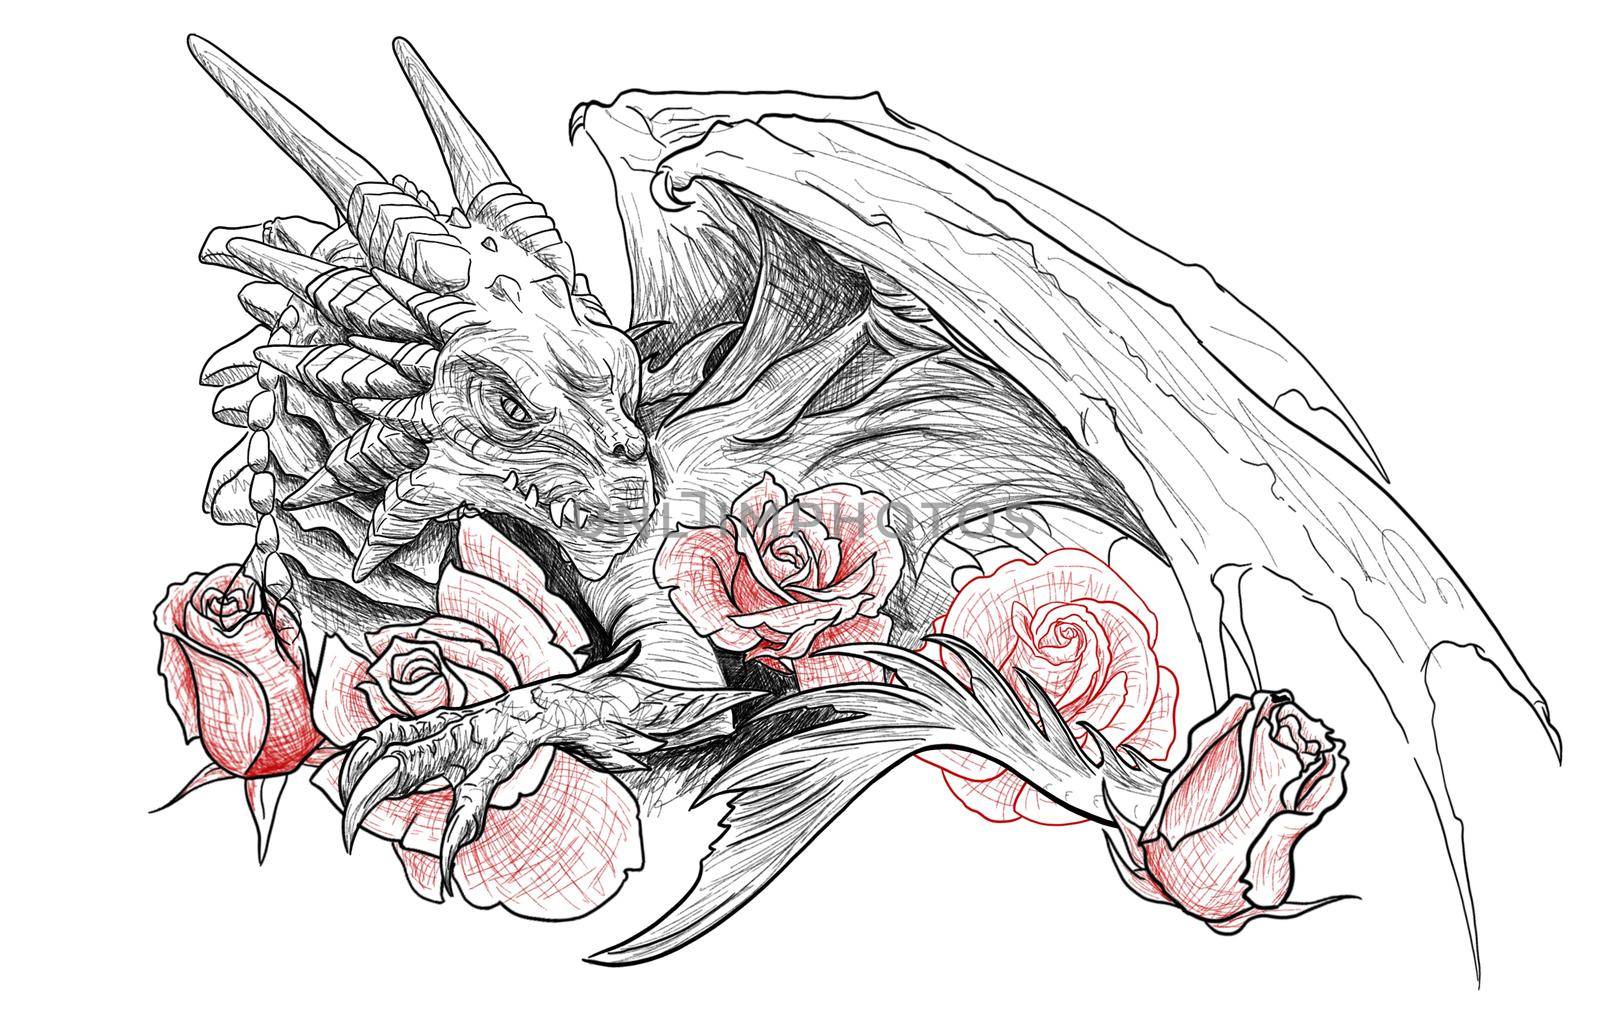 art dragon outline in graphic style with red flowers illustration